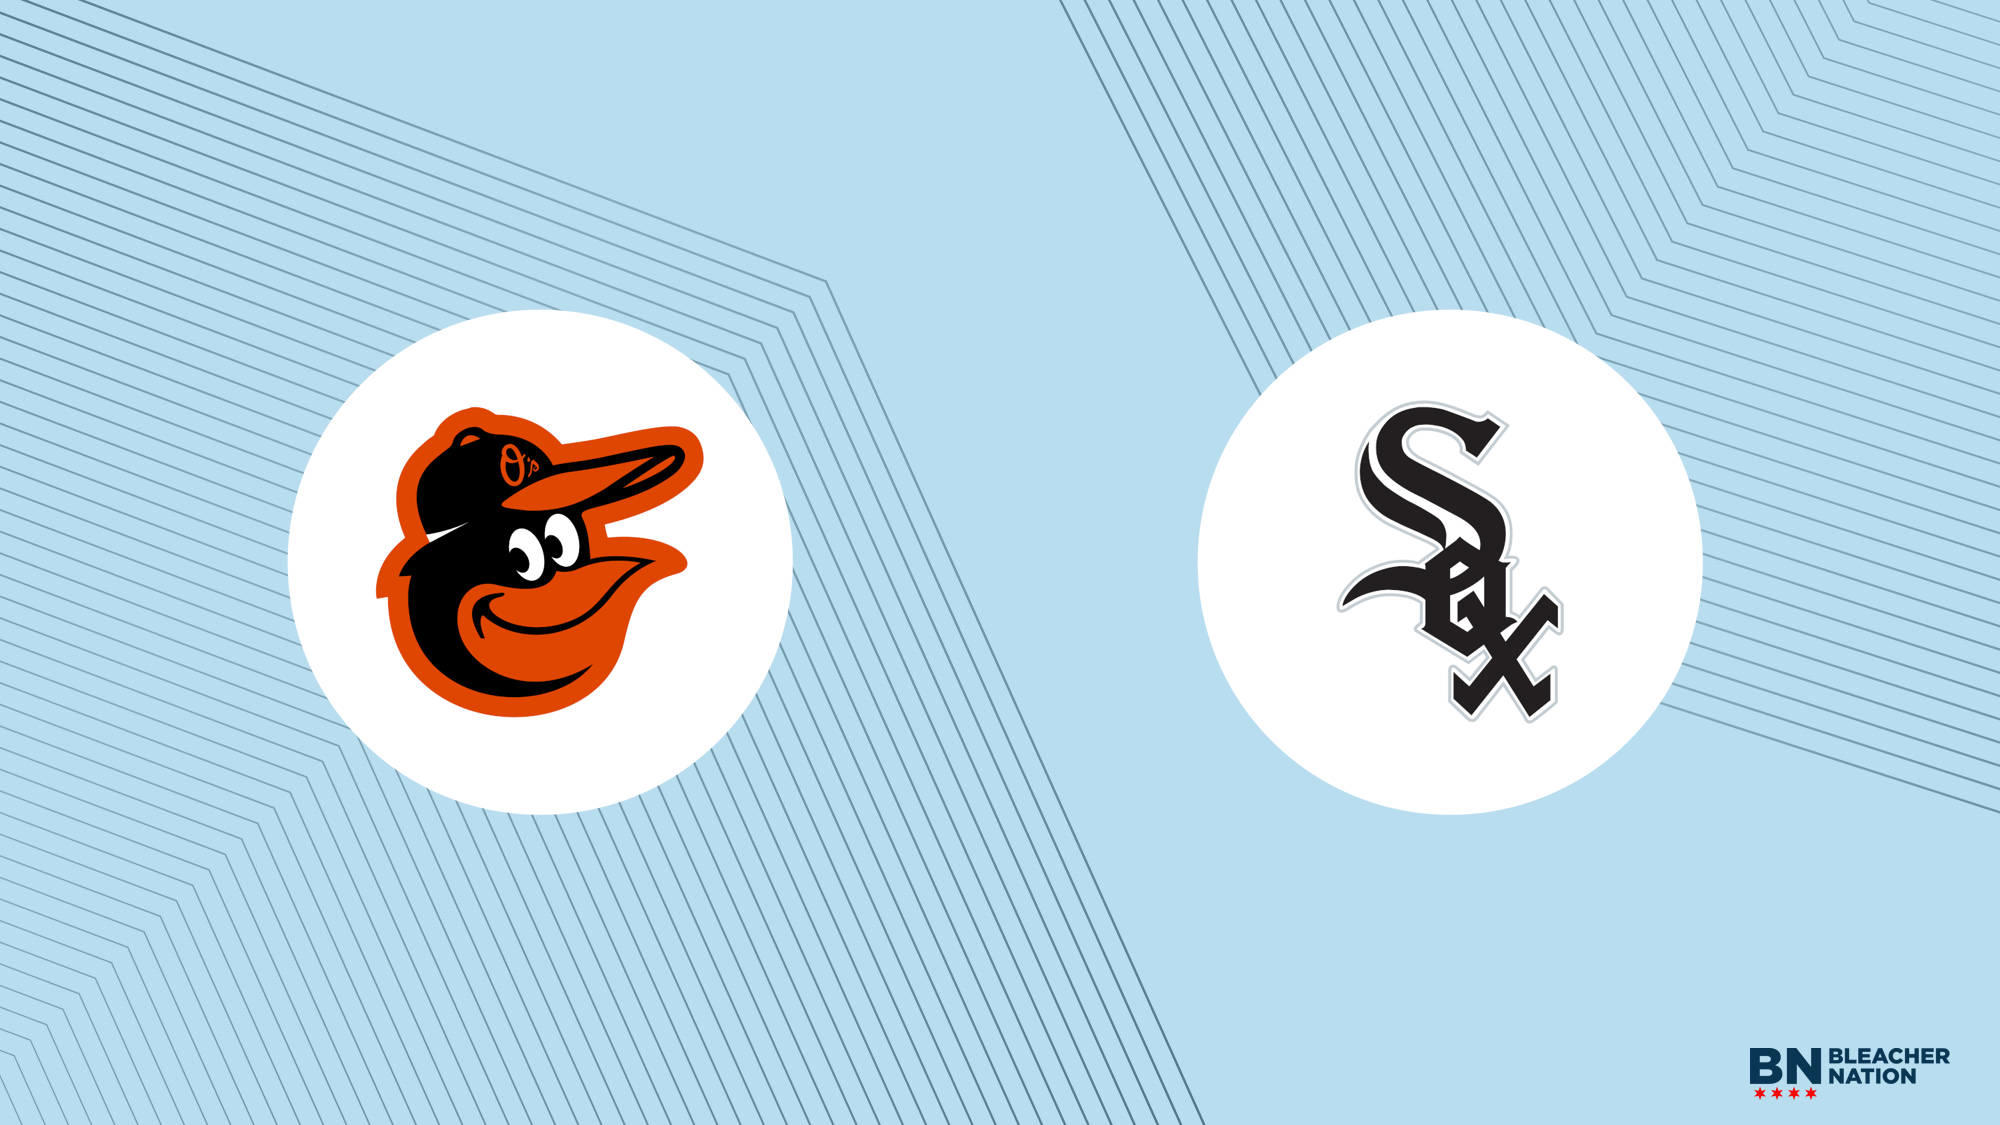 White Sox vs. Orioles odds, tips and betting trends